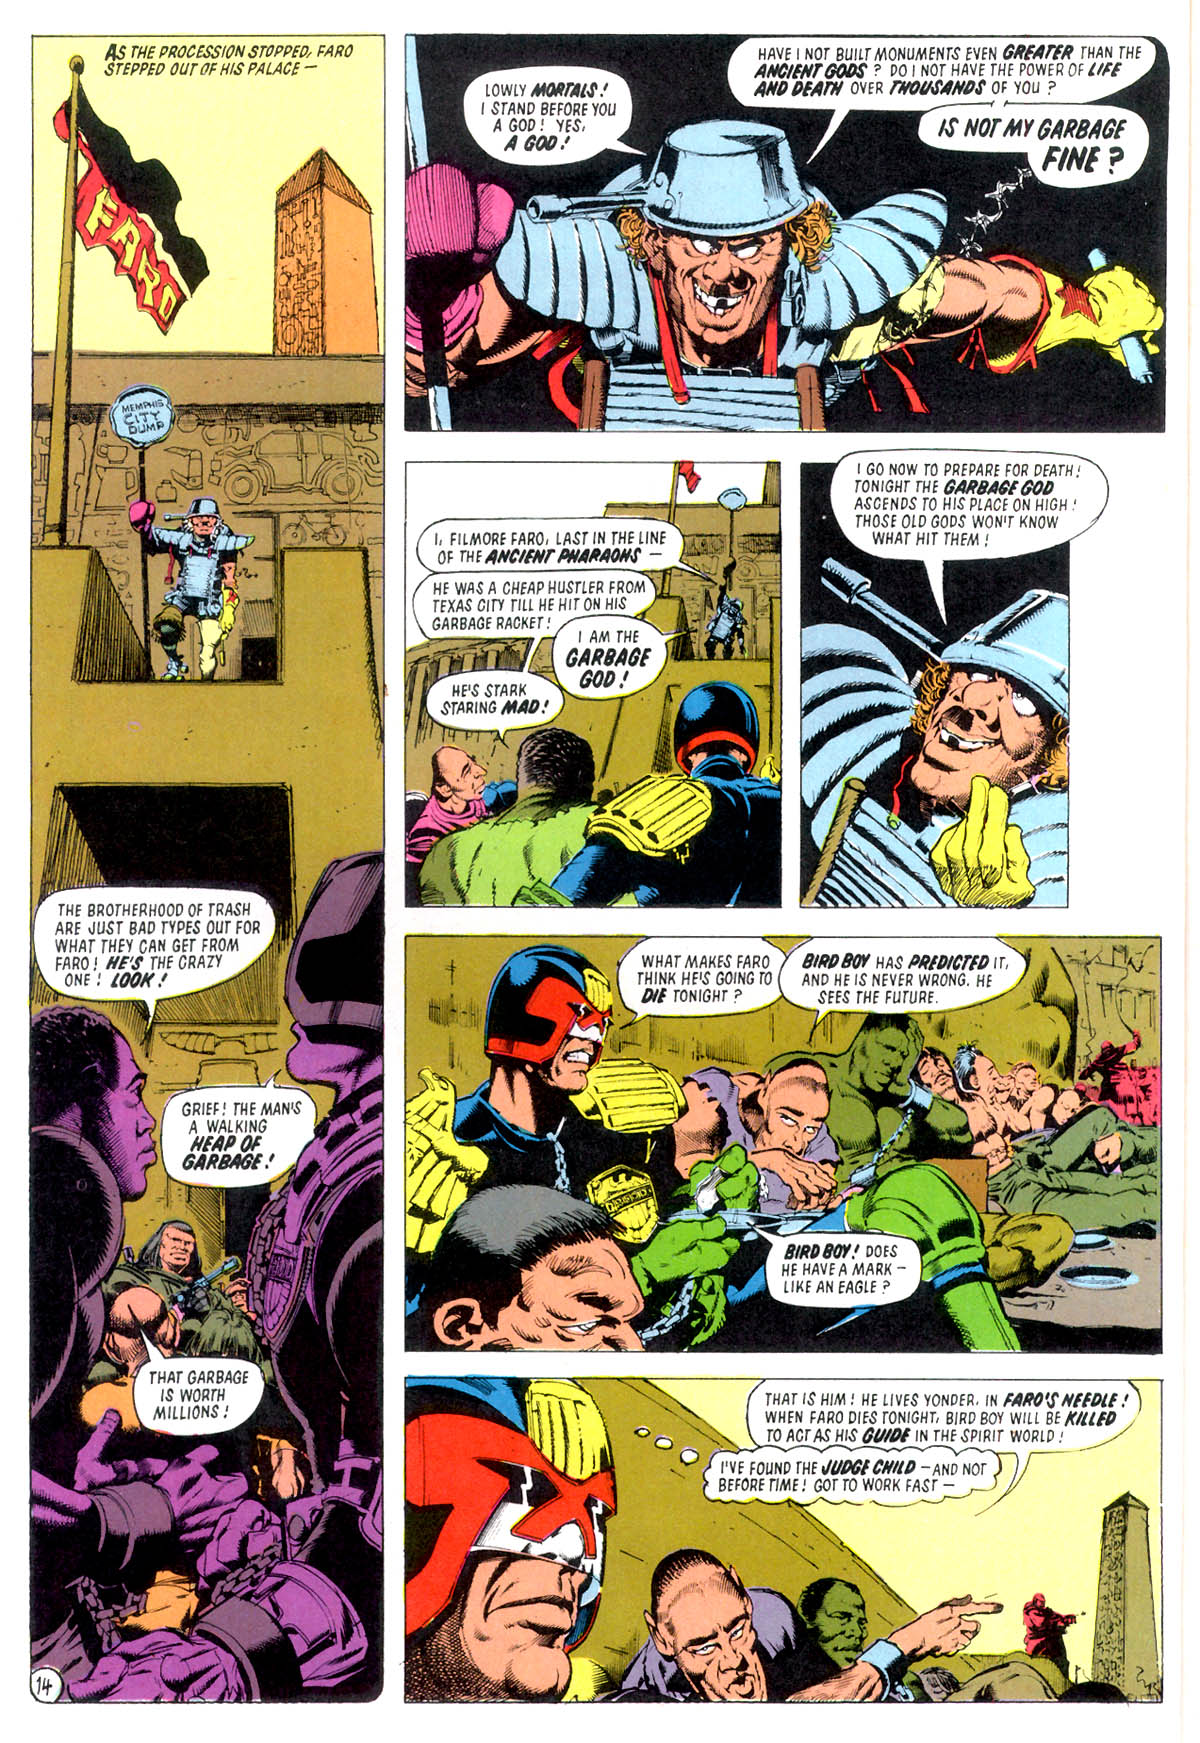 Read online Judge Dredd: The Complete Case Files comic -  Issue # TPB 4 - 15